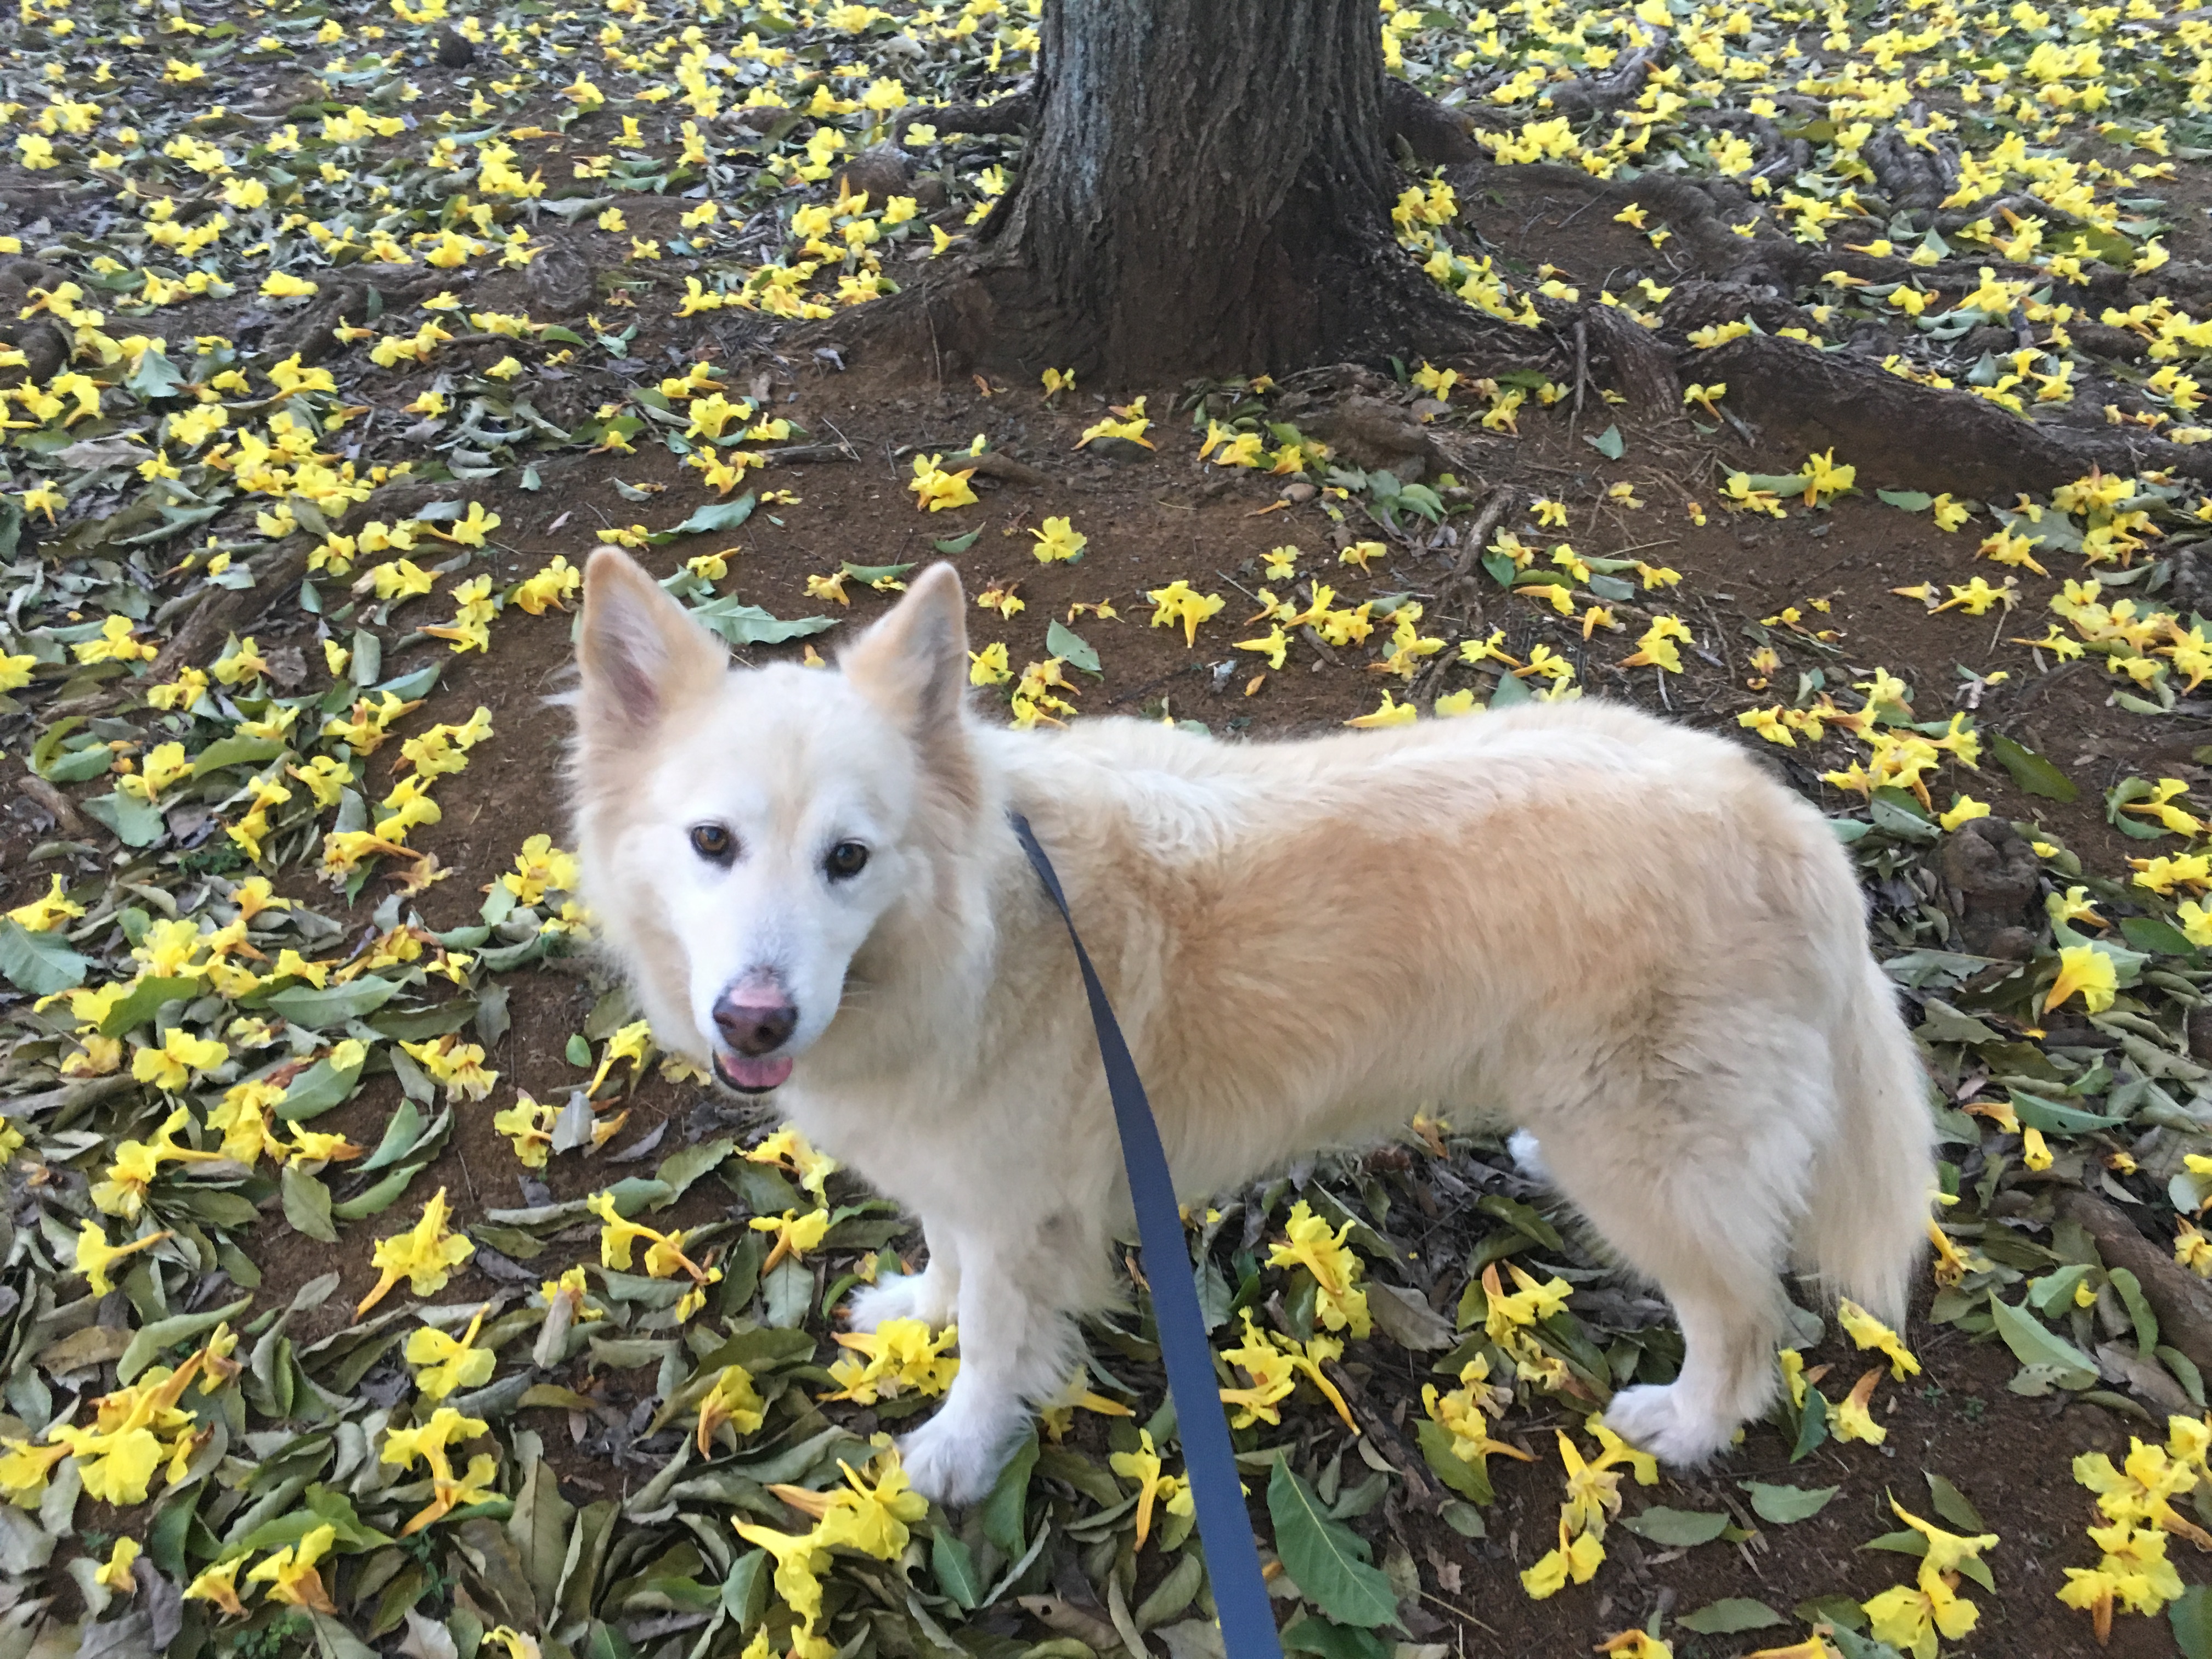 Large, fluffy white dog  stands under a tree, surrounded by yellow flowers